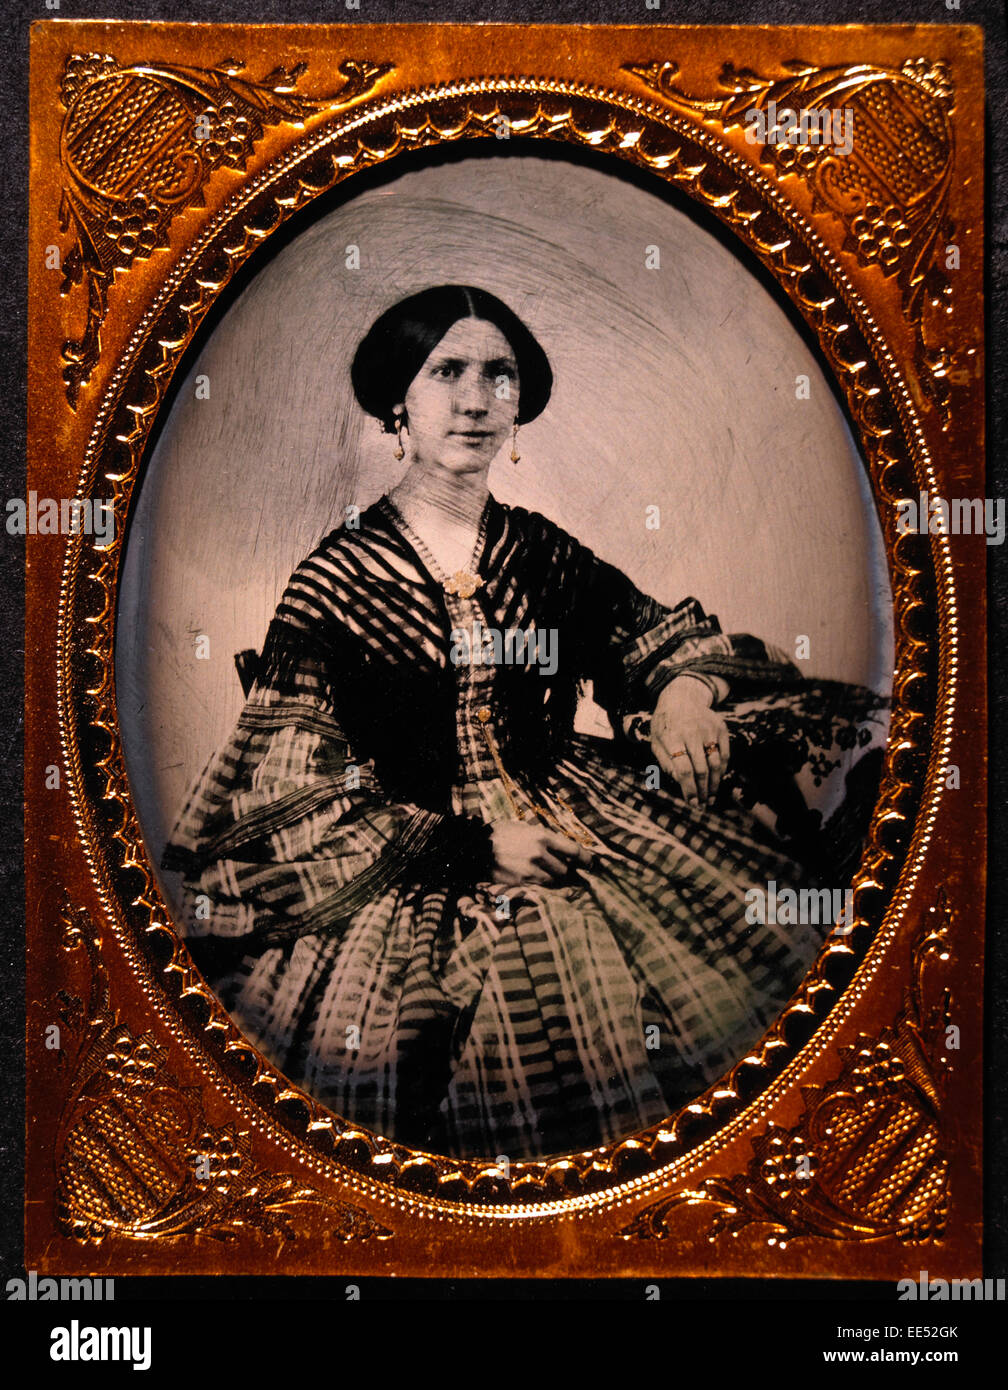 Donna Middle-Aged ritratto, Daguerreotype, circa 1850 Foto Stock